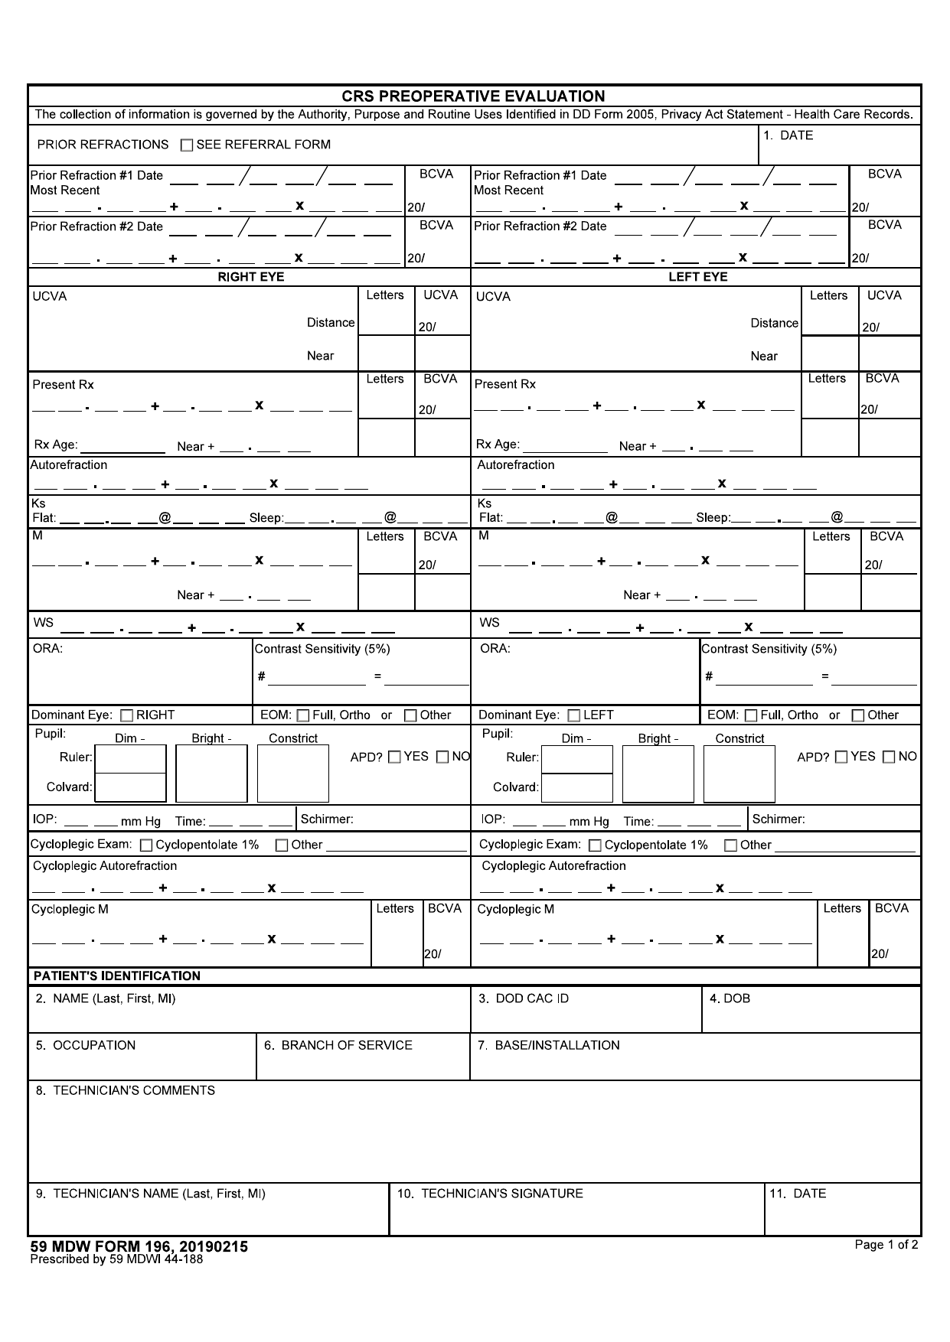 59 MDW Form 196 Crs Preoperative Evaluation, Page 1